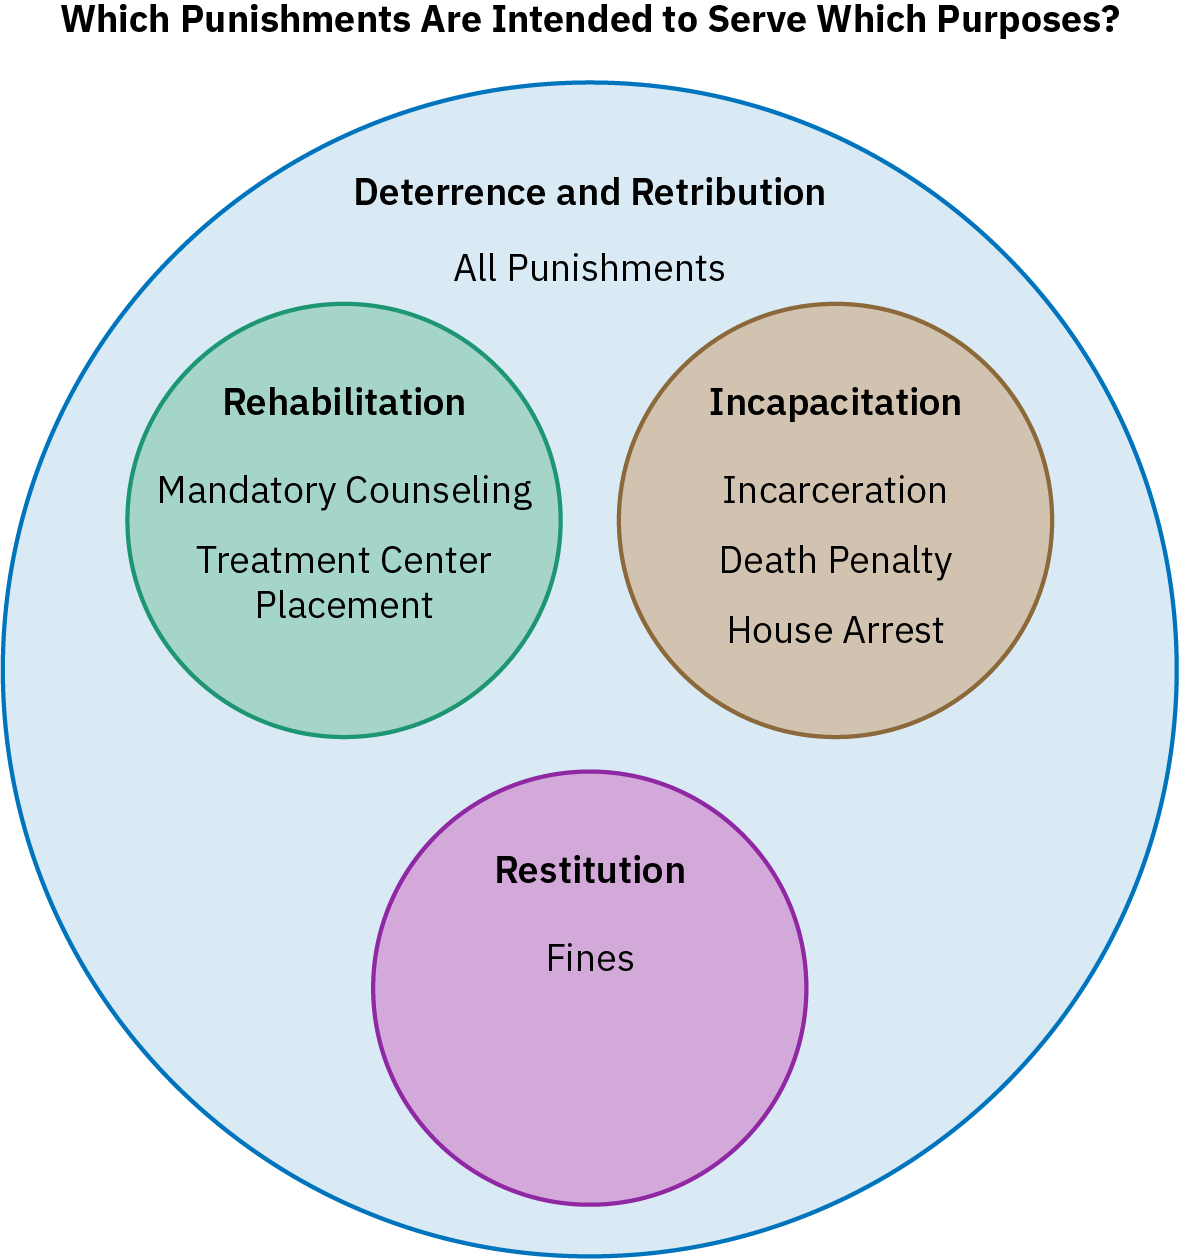 A figure shows the purposes beyond deterrence and retribution that different types of punishments are intended to serve. Mandatory counseling and treatment center placement are intended to rehabilitate. Incarceration, the death penalty, or house arrest are intended to incapacitate, and fines are intended to require the person being punished to provide restitution for what they have done.